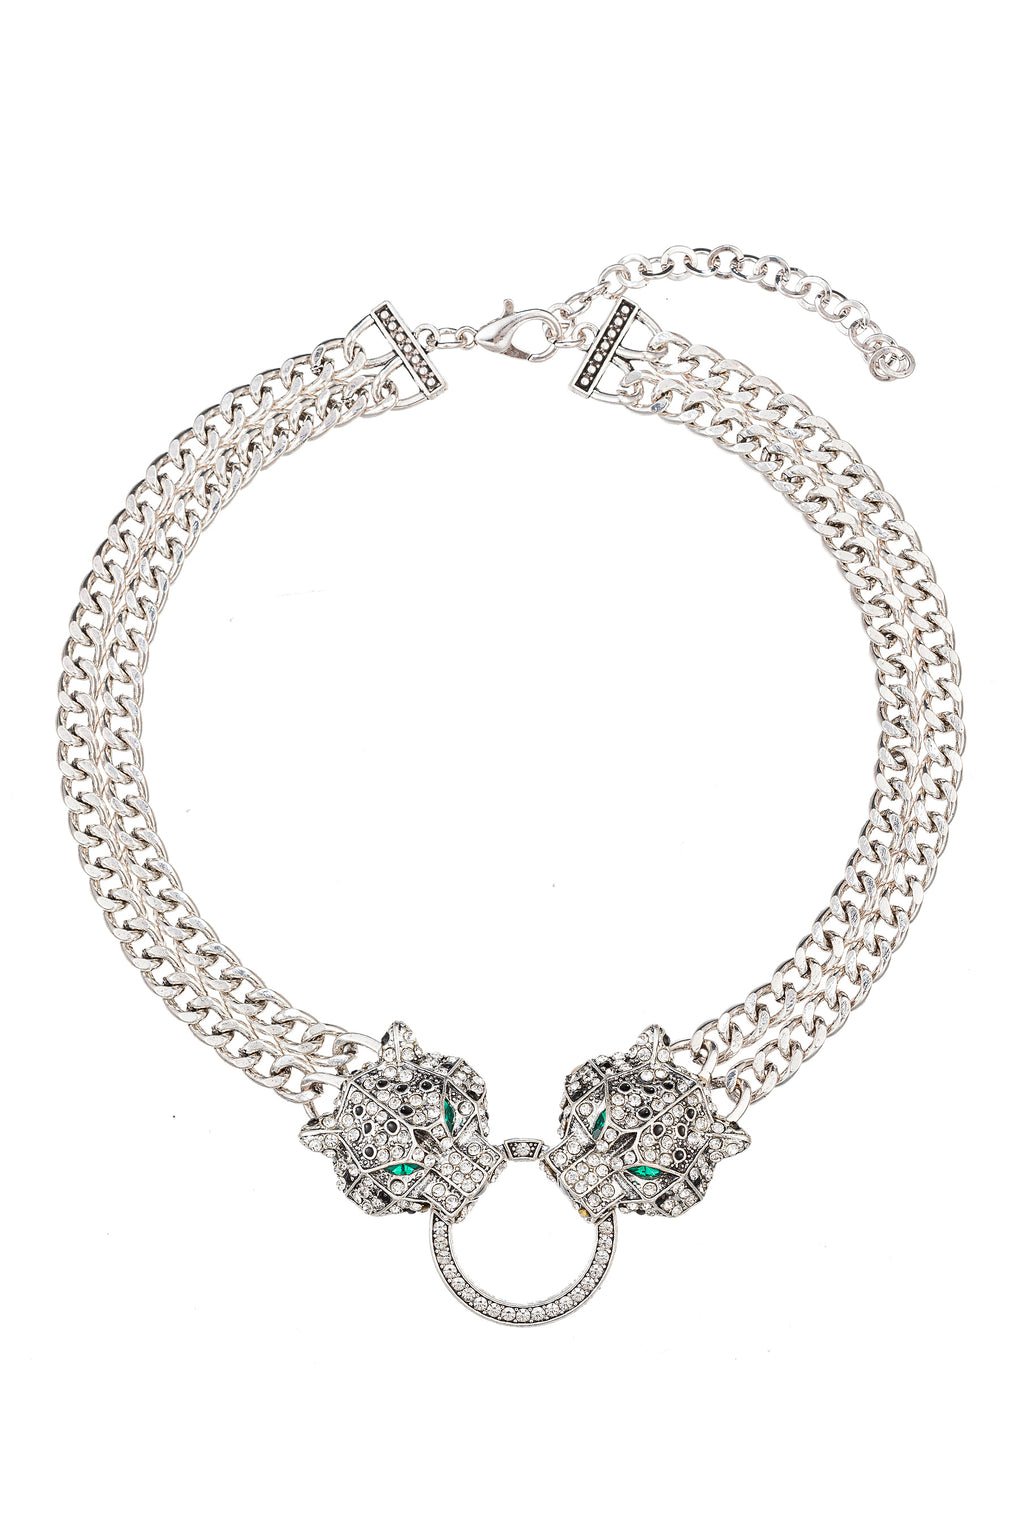 Silver alloy leopard statement necklace studded with glass crystals.